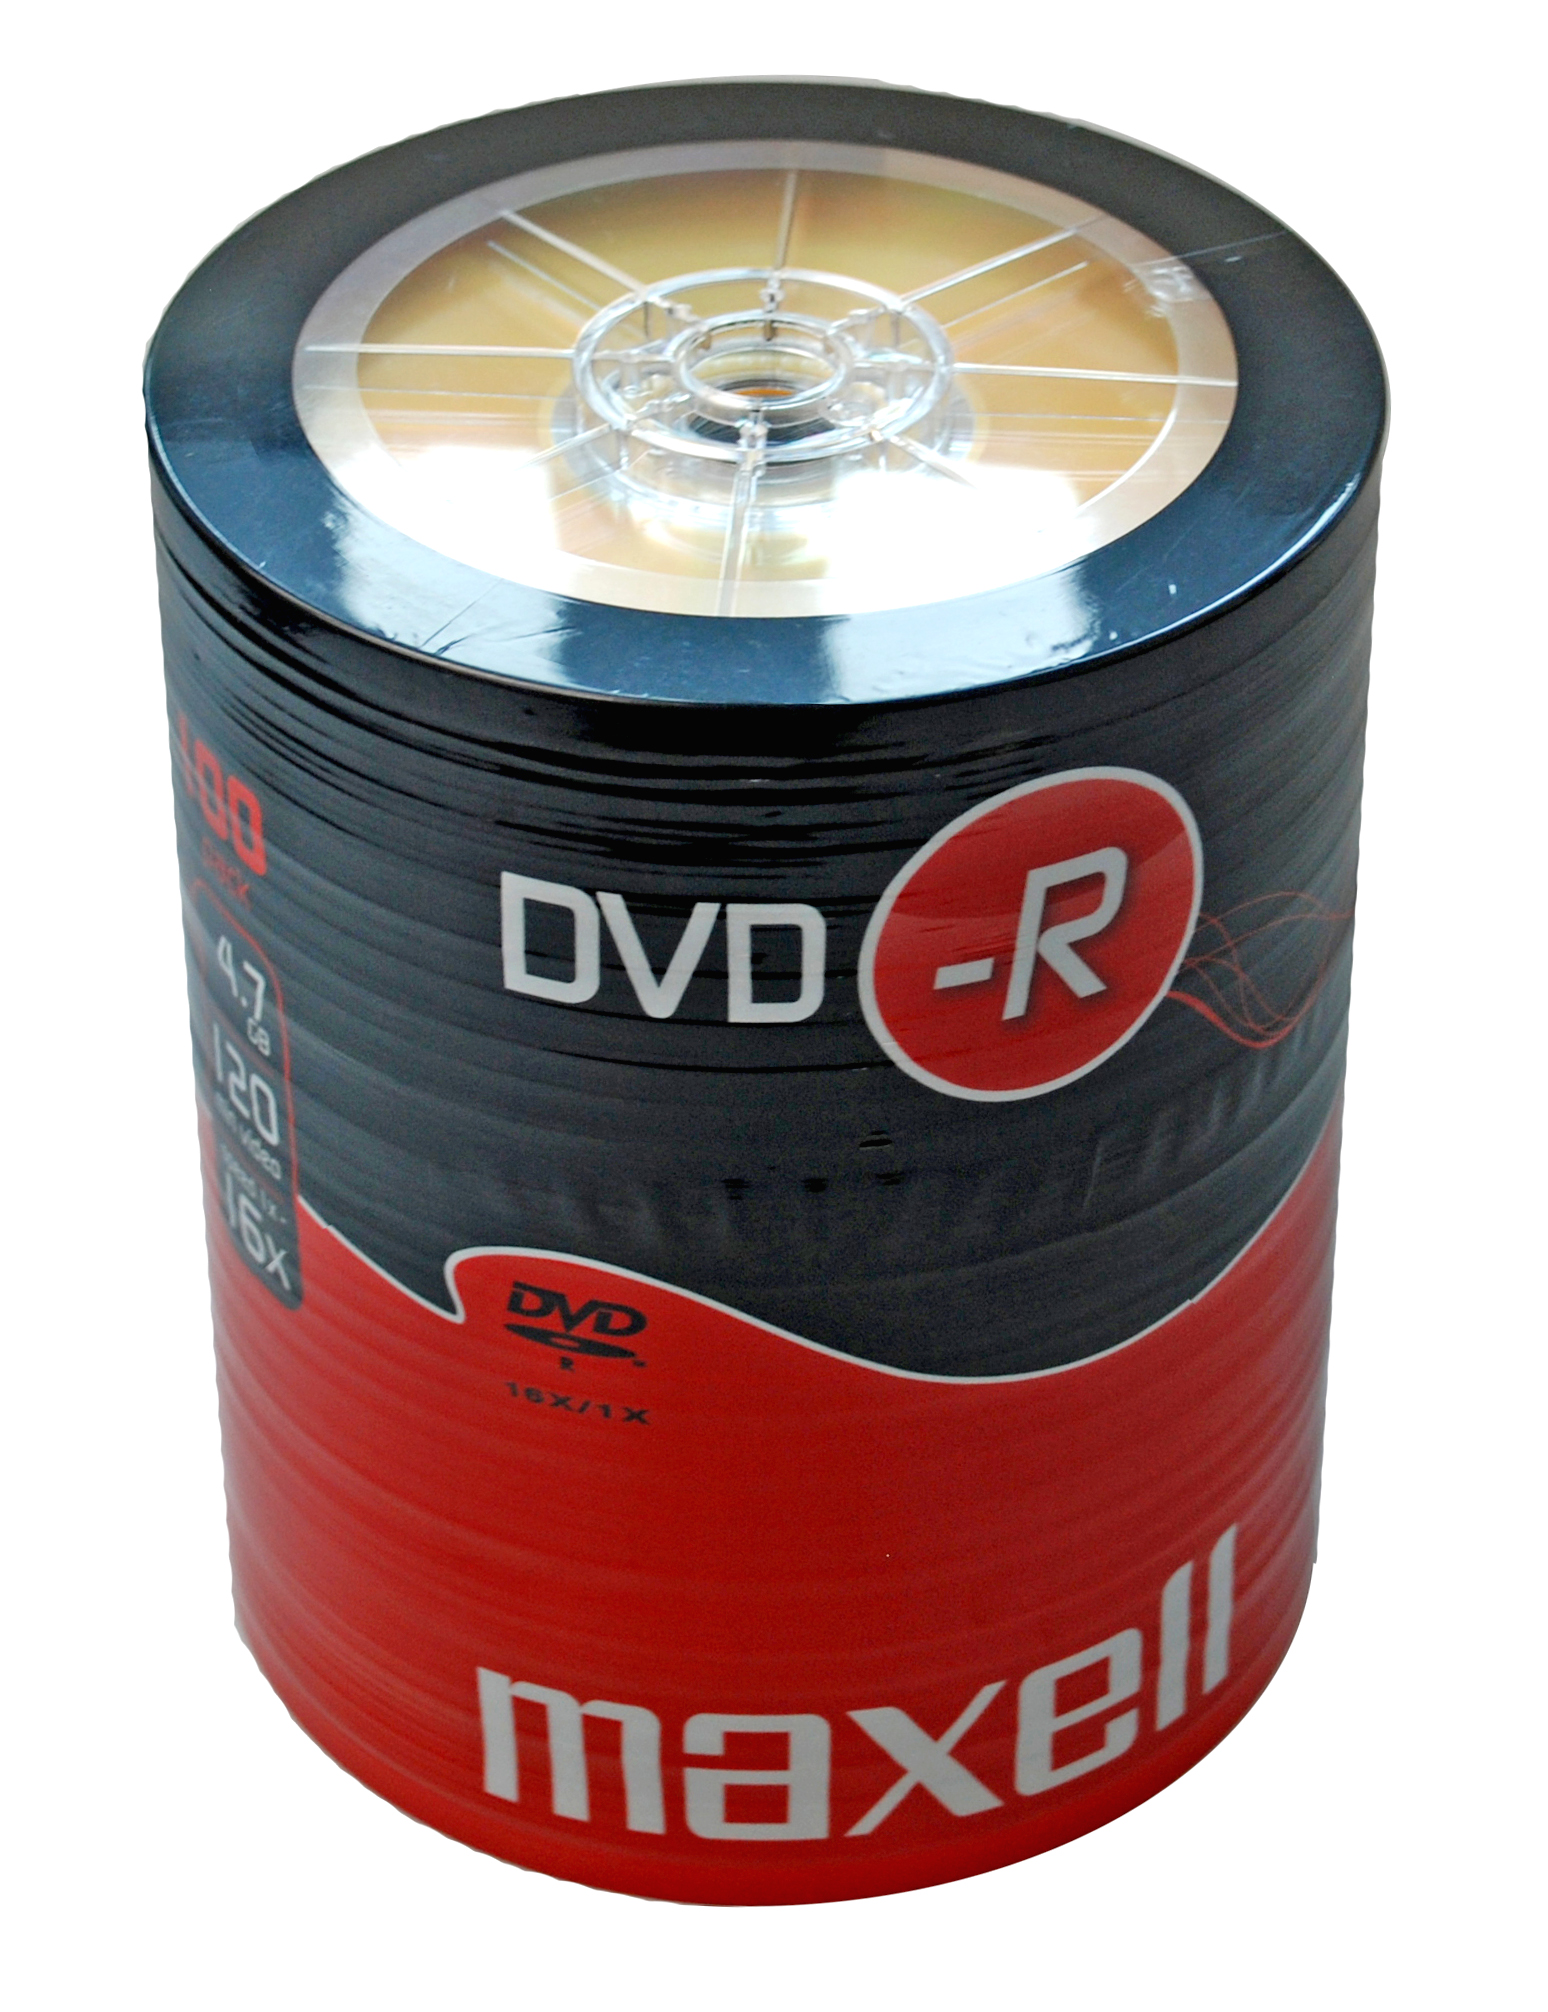 Maxell 16x Branded DVD-R 4.7GB Pack of 100 - Shrink-wrap | 275733.40